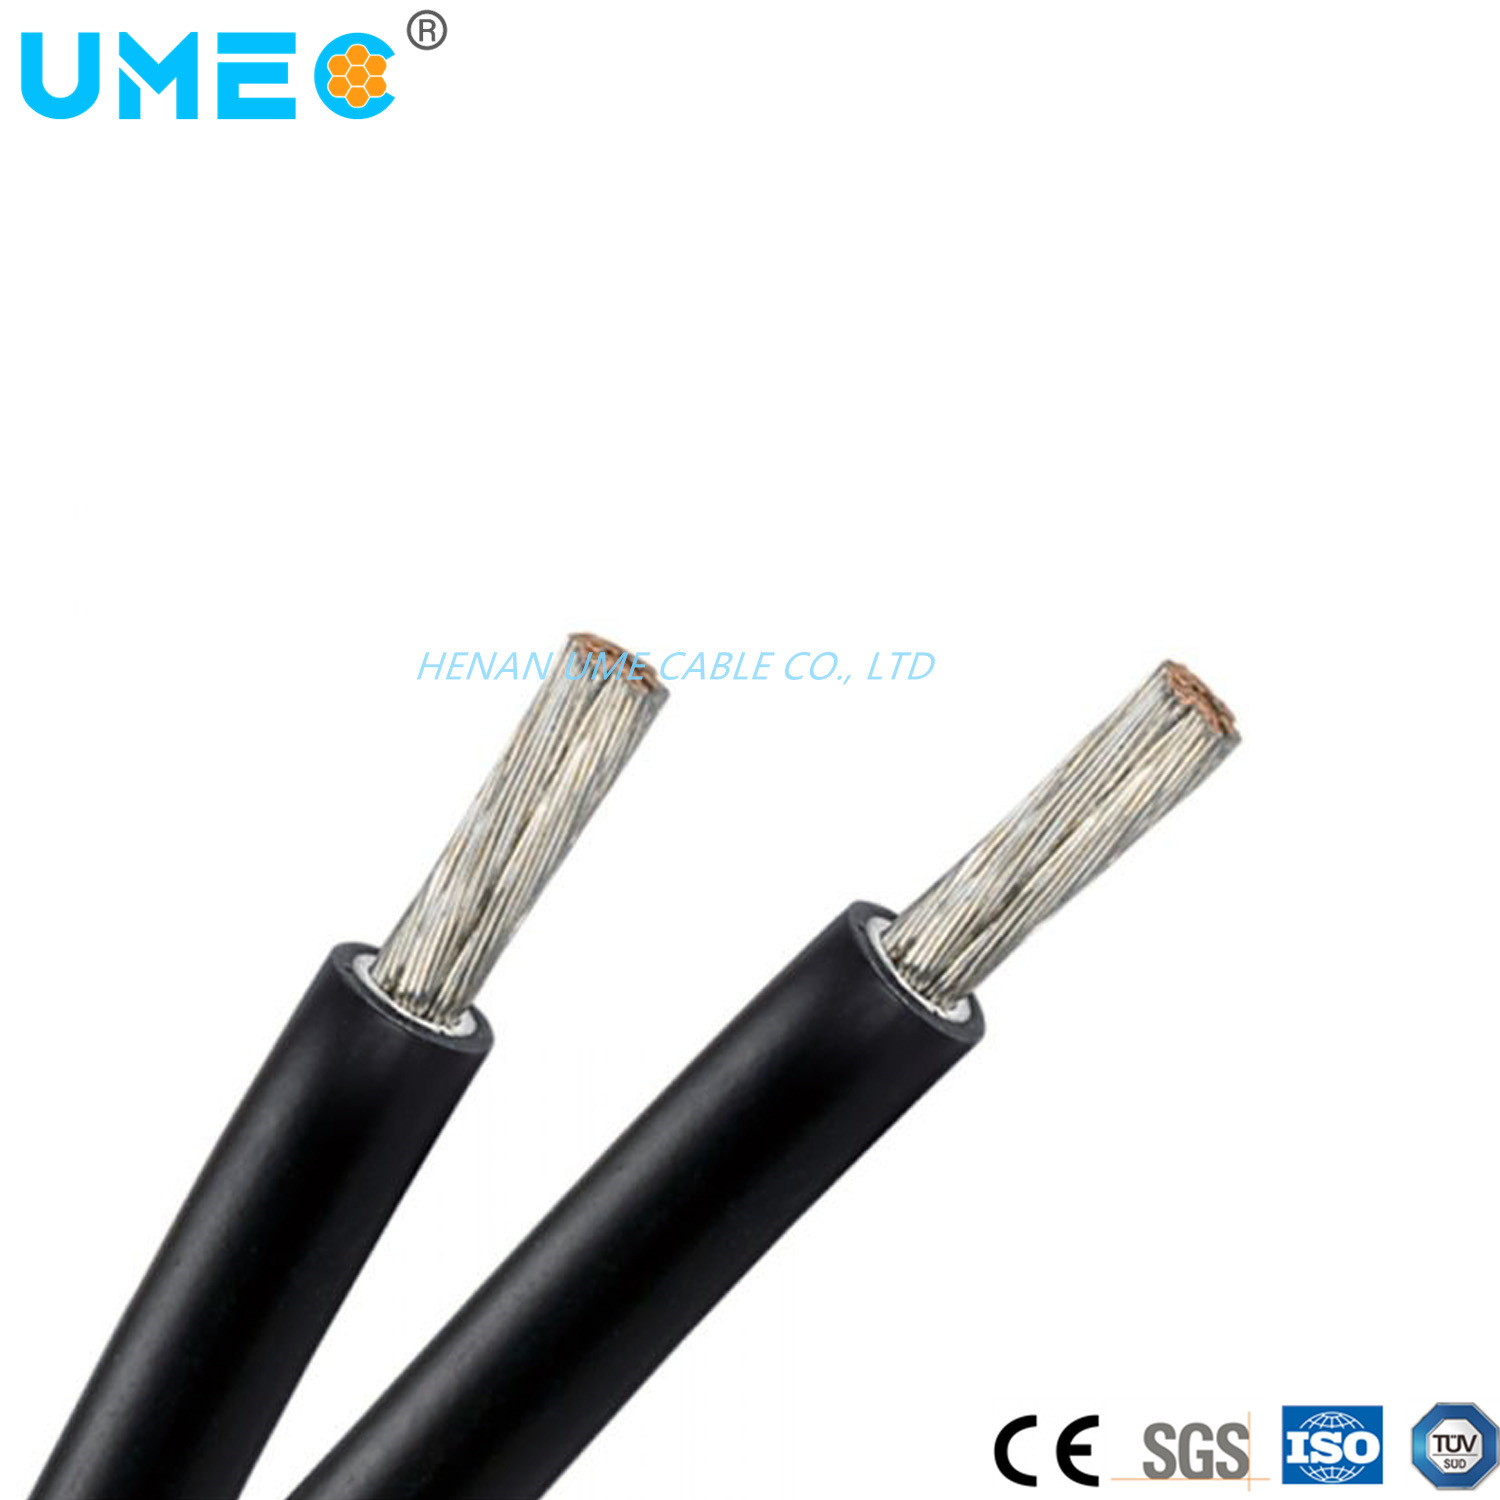 Electrical PV Cable Fire Resistant Cables Twin Core DC Solar Cable #1/0 #2/0 #3/0 #4/0 Guage PV1-F Electrical Wire Cable